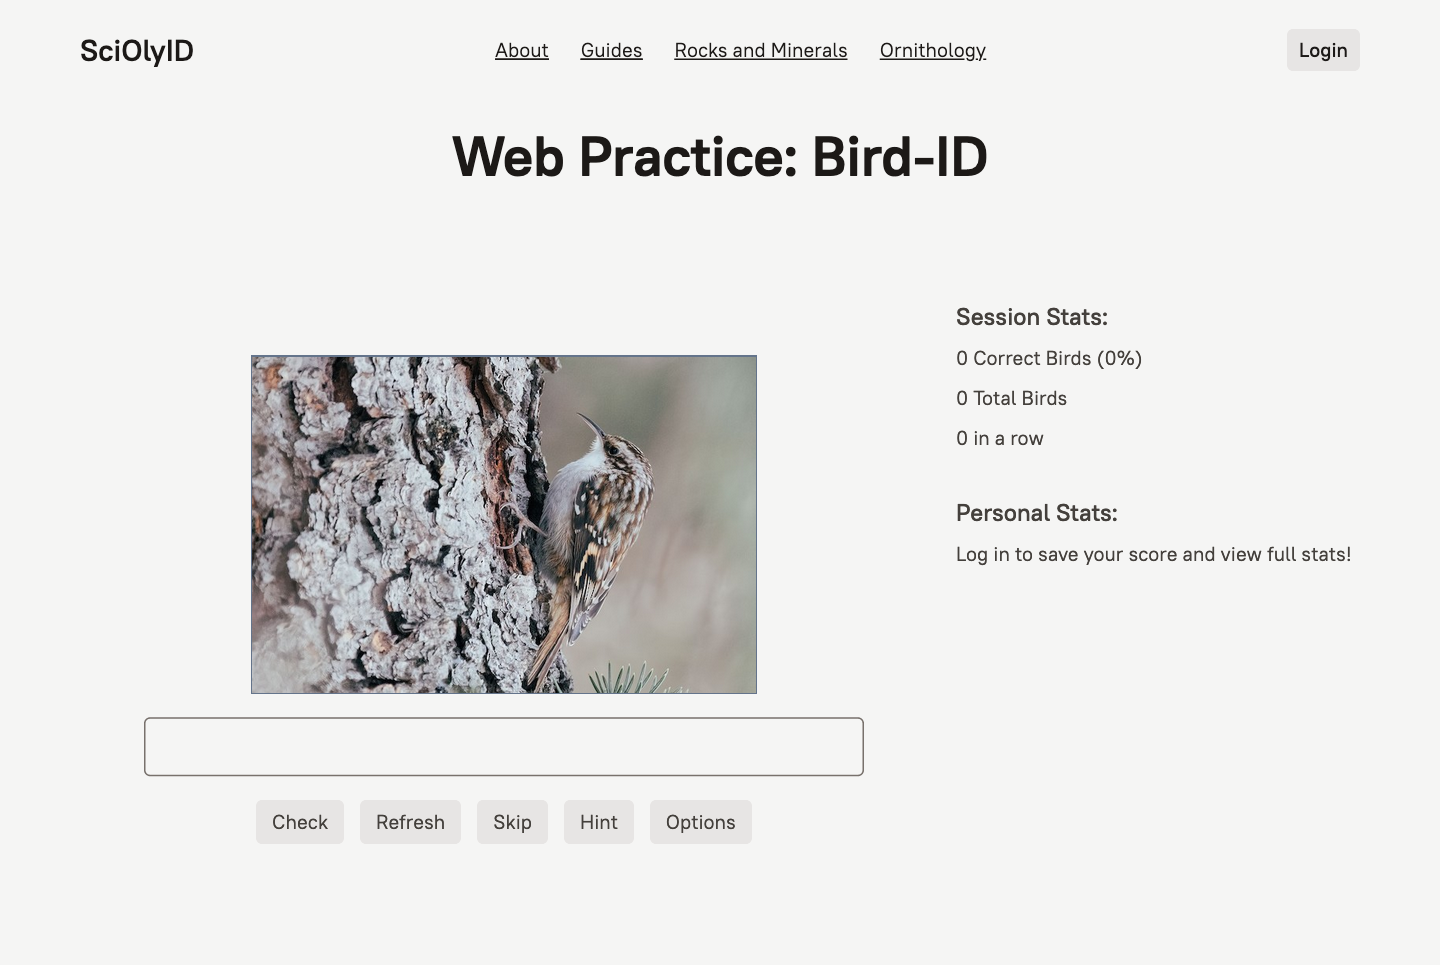 a screenshot of the web practice interface